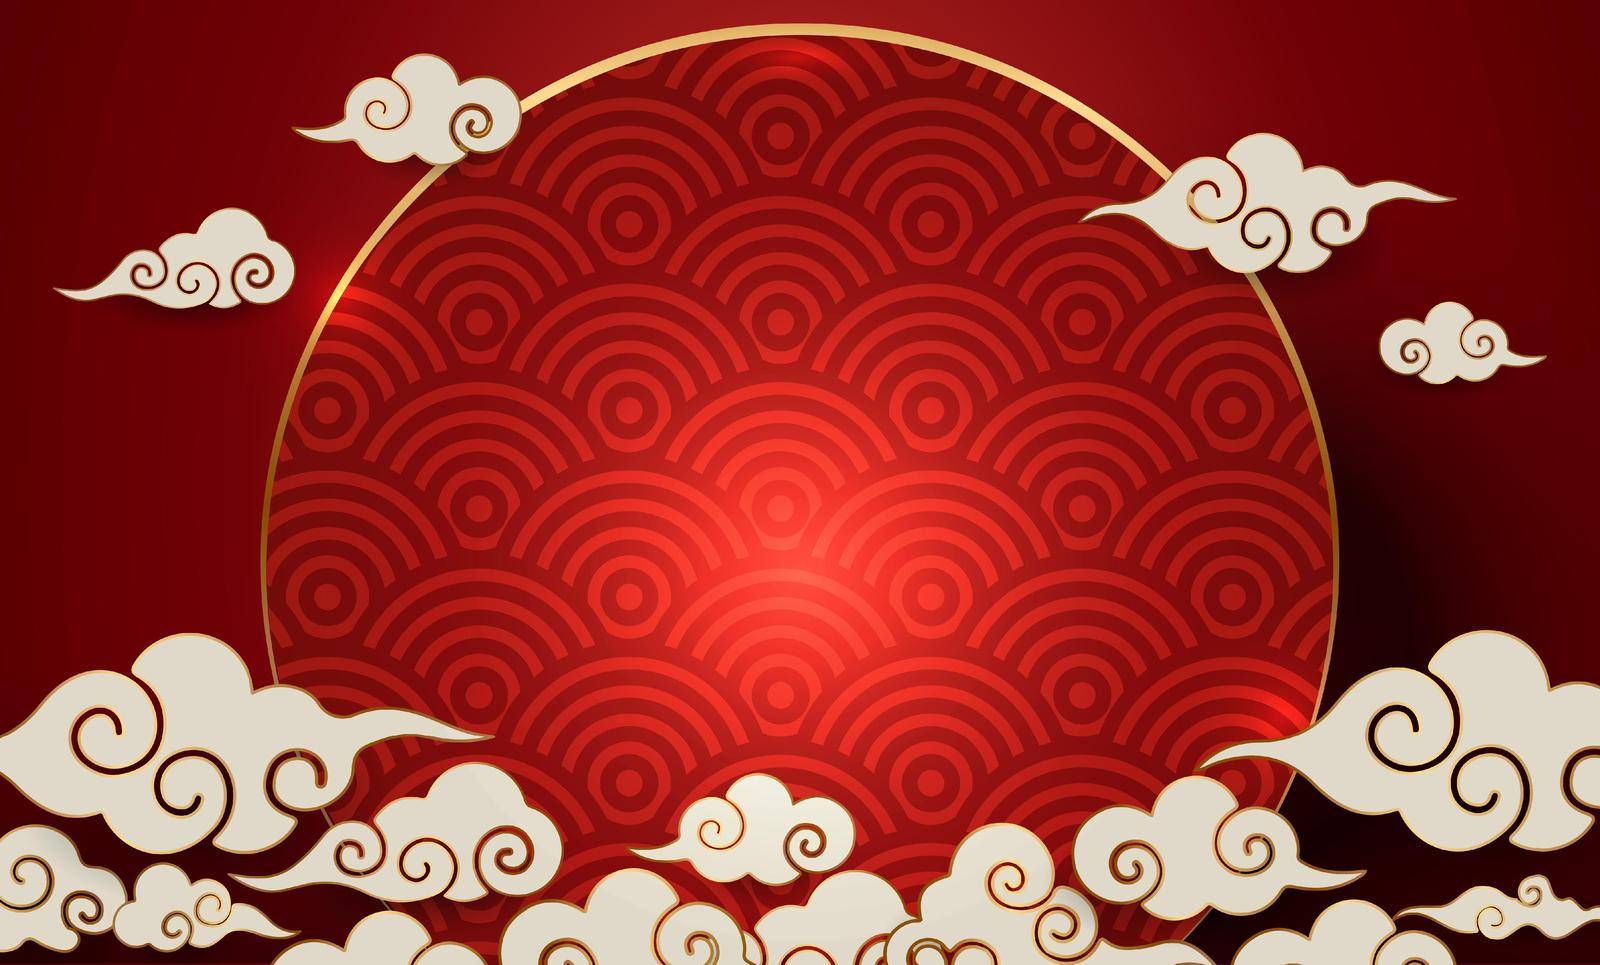 Podium and background for Chinese new year,Chinese Festivals, Mid Autumn Festival , flower and asian elements on background